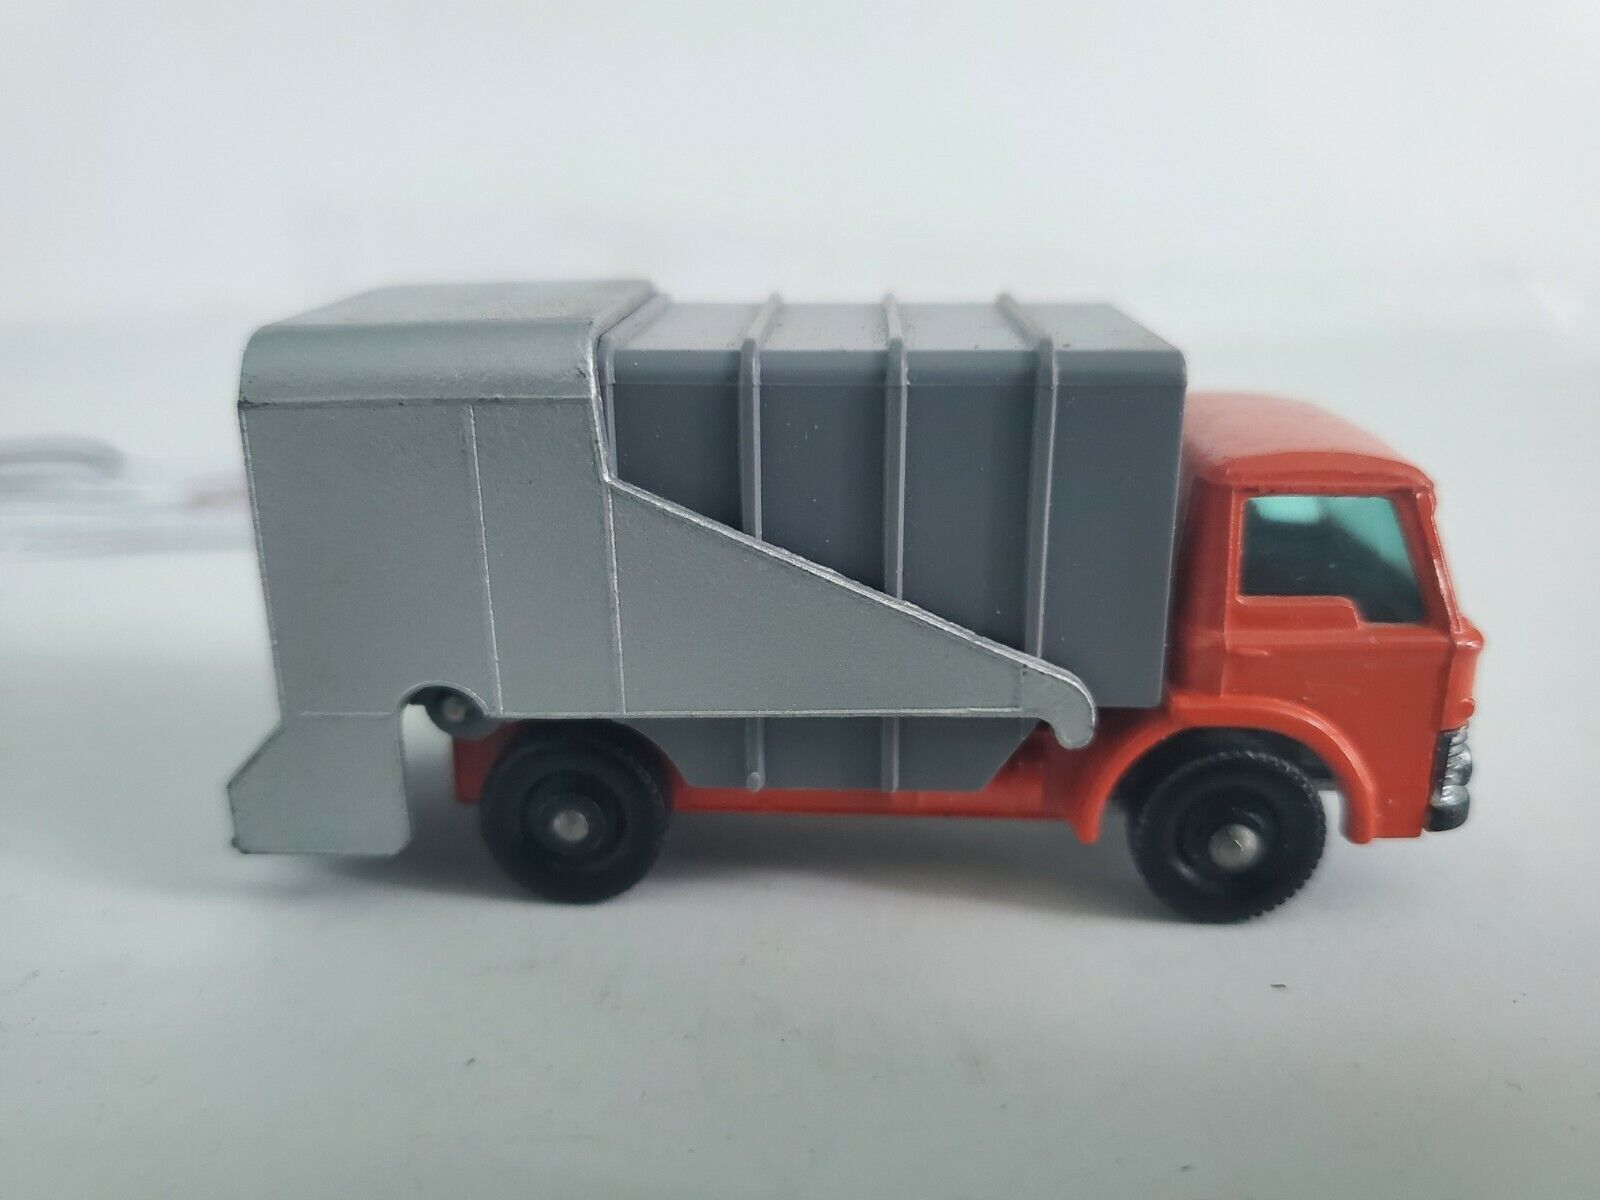 1966 Matchbox Lesney No.7 Ford Refuse Truck - Excellent!